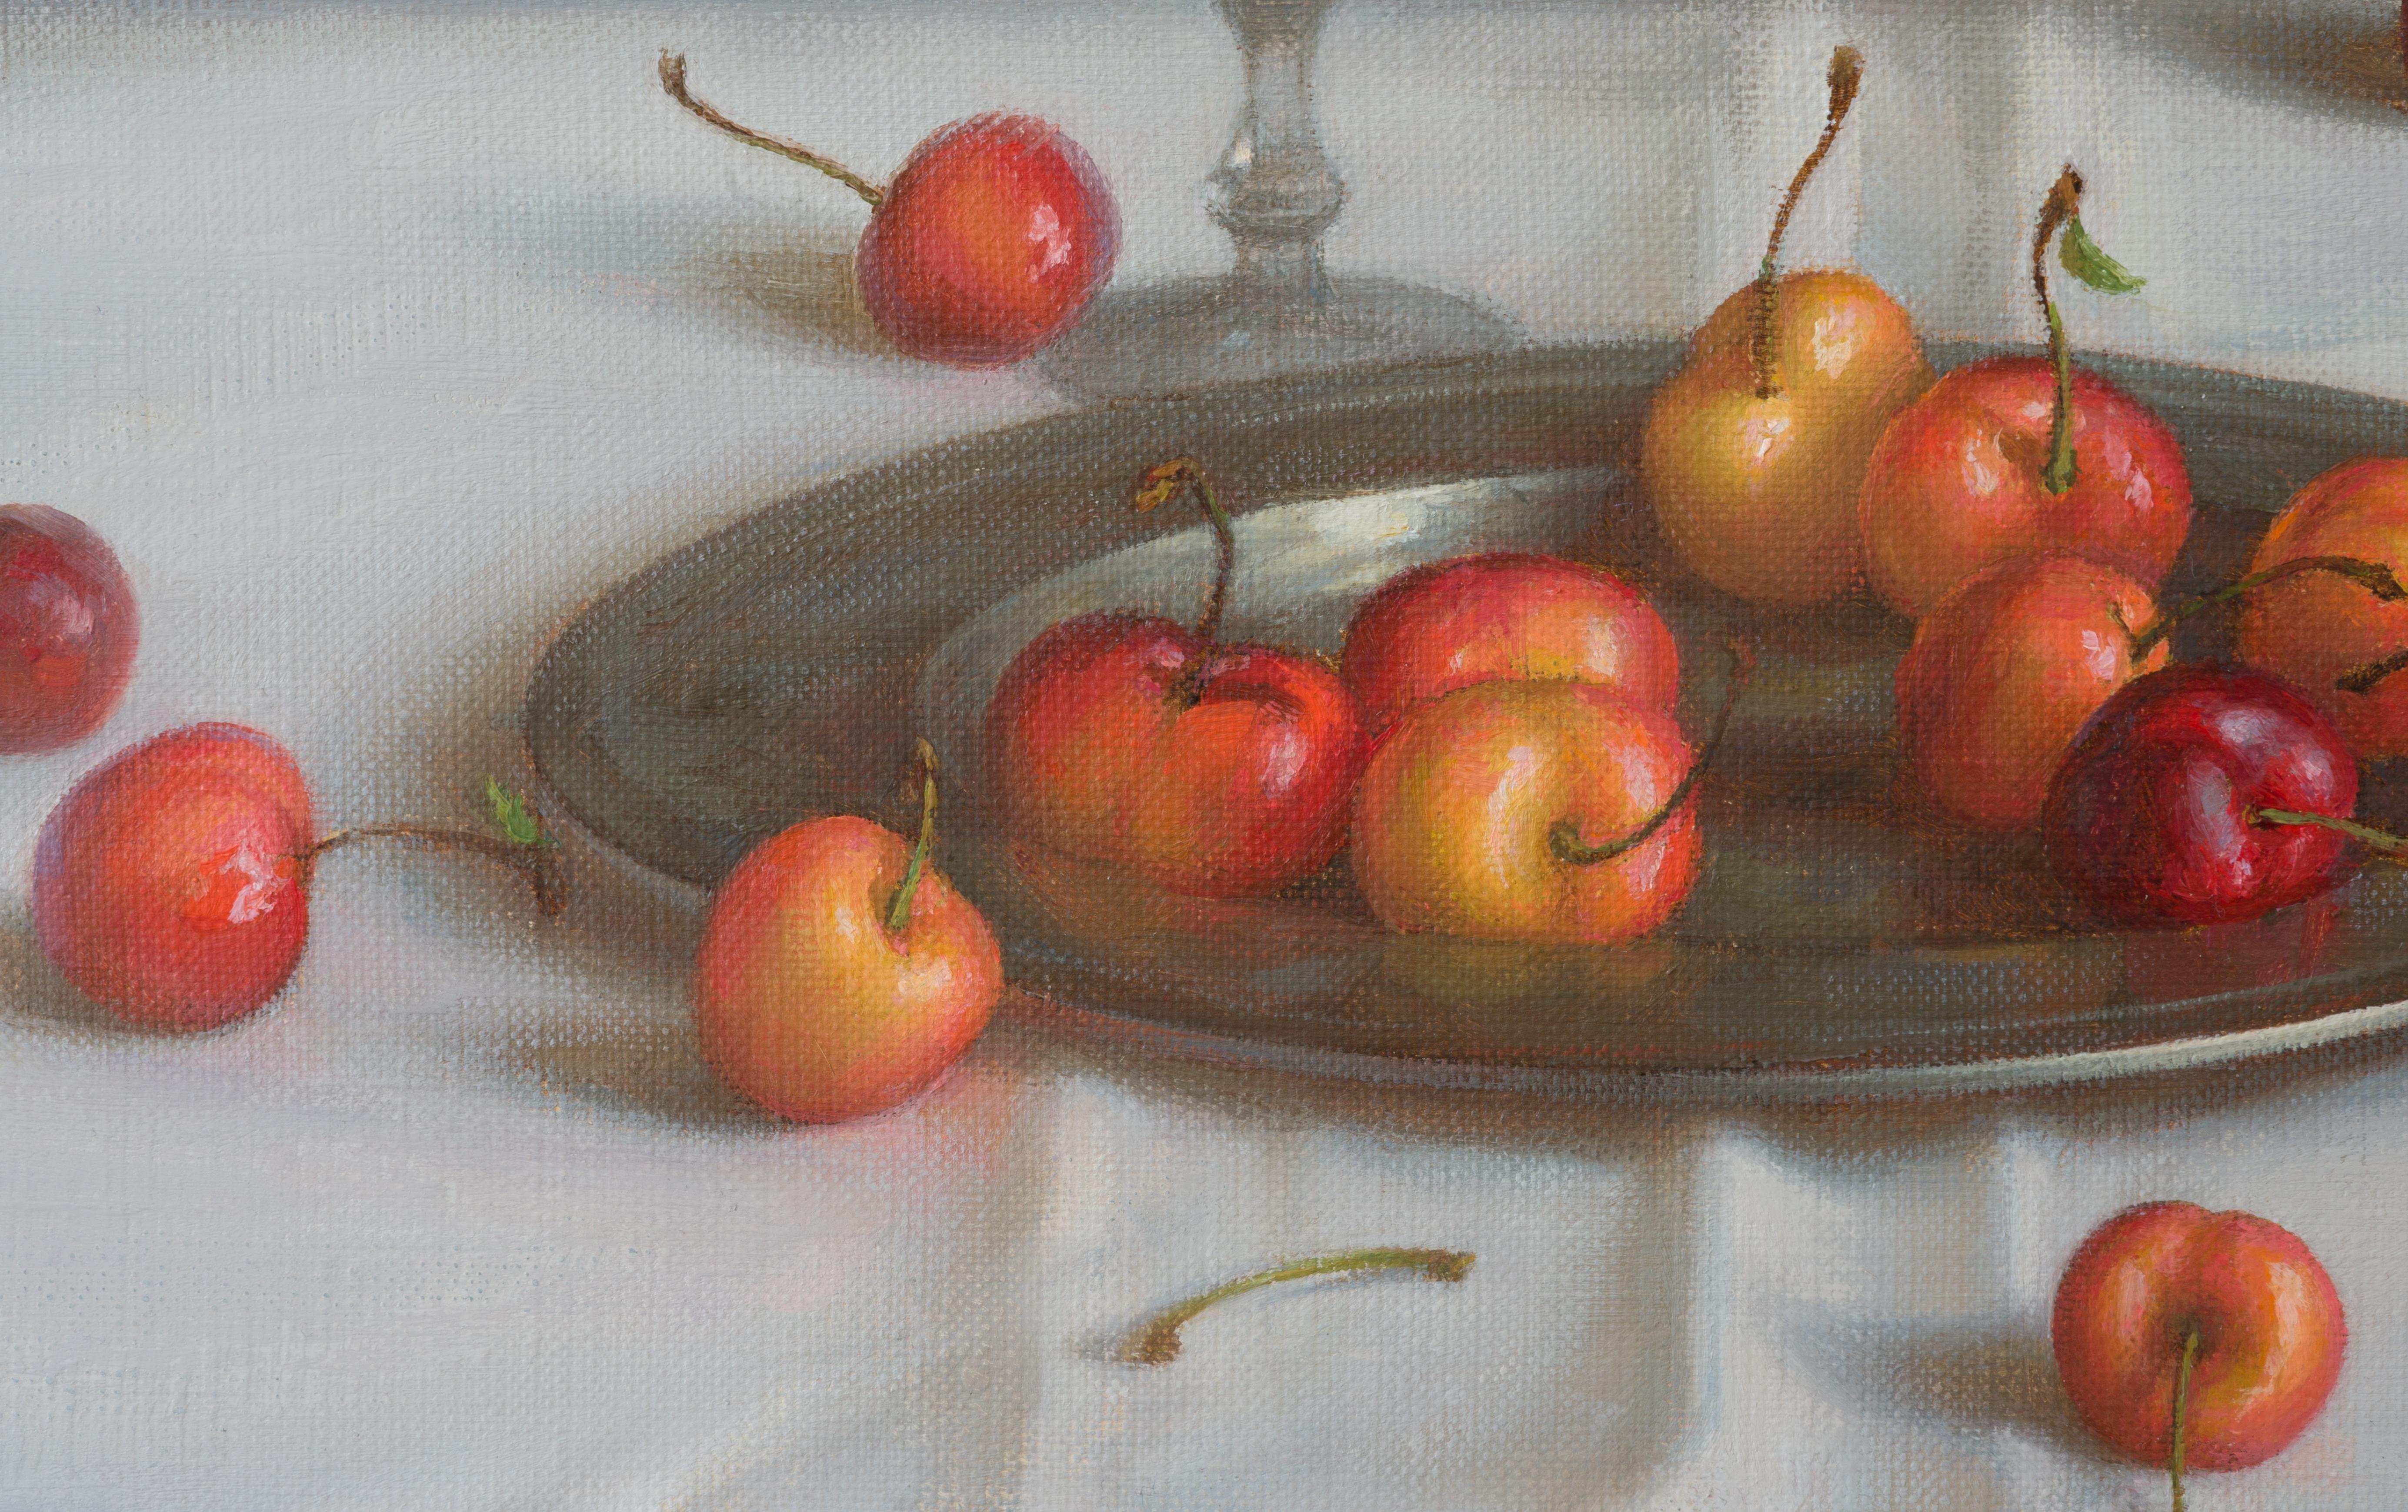  Scattered cherry on the metal plate create a vivid contrast against the white tablecloth focusing the viewer's eye towards the center of the composition. The various shades of red and yellow and the choice of details made it possible to convey the